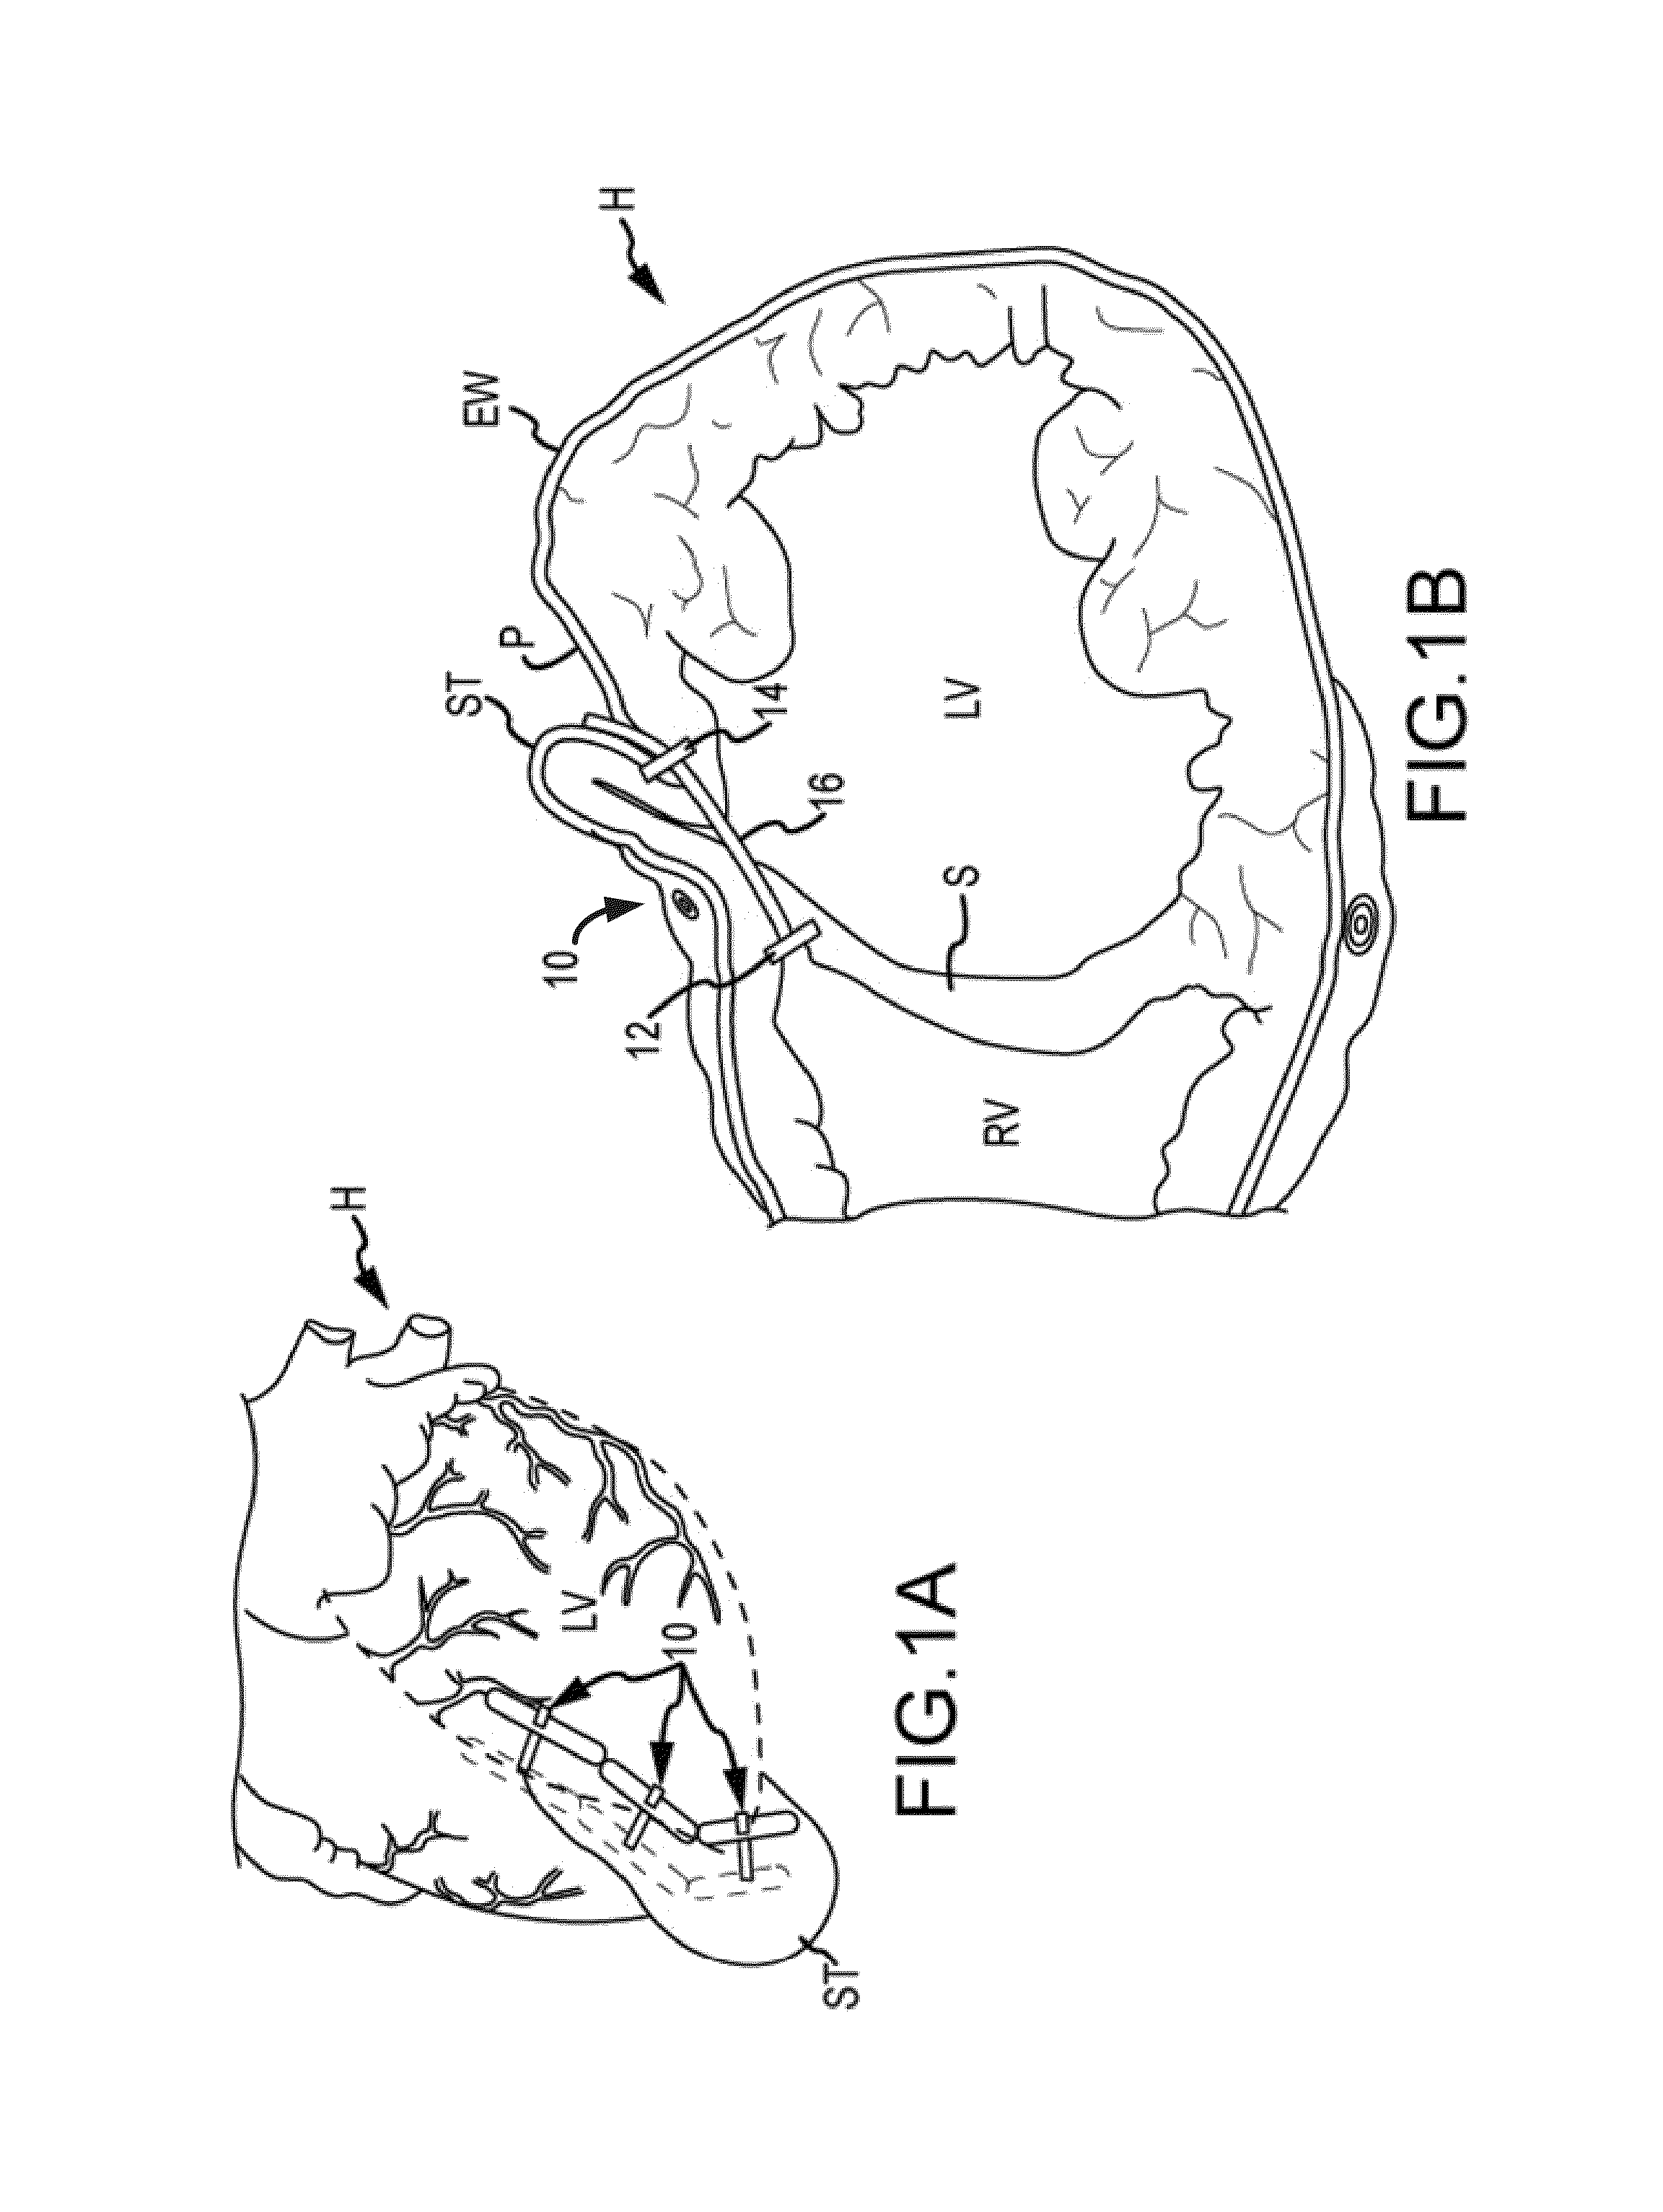 Trans-catheter ventricular reconstruction structures, methods, and systems for treatment of congestive heart failure and other conditions